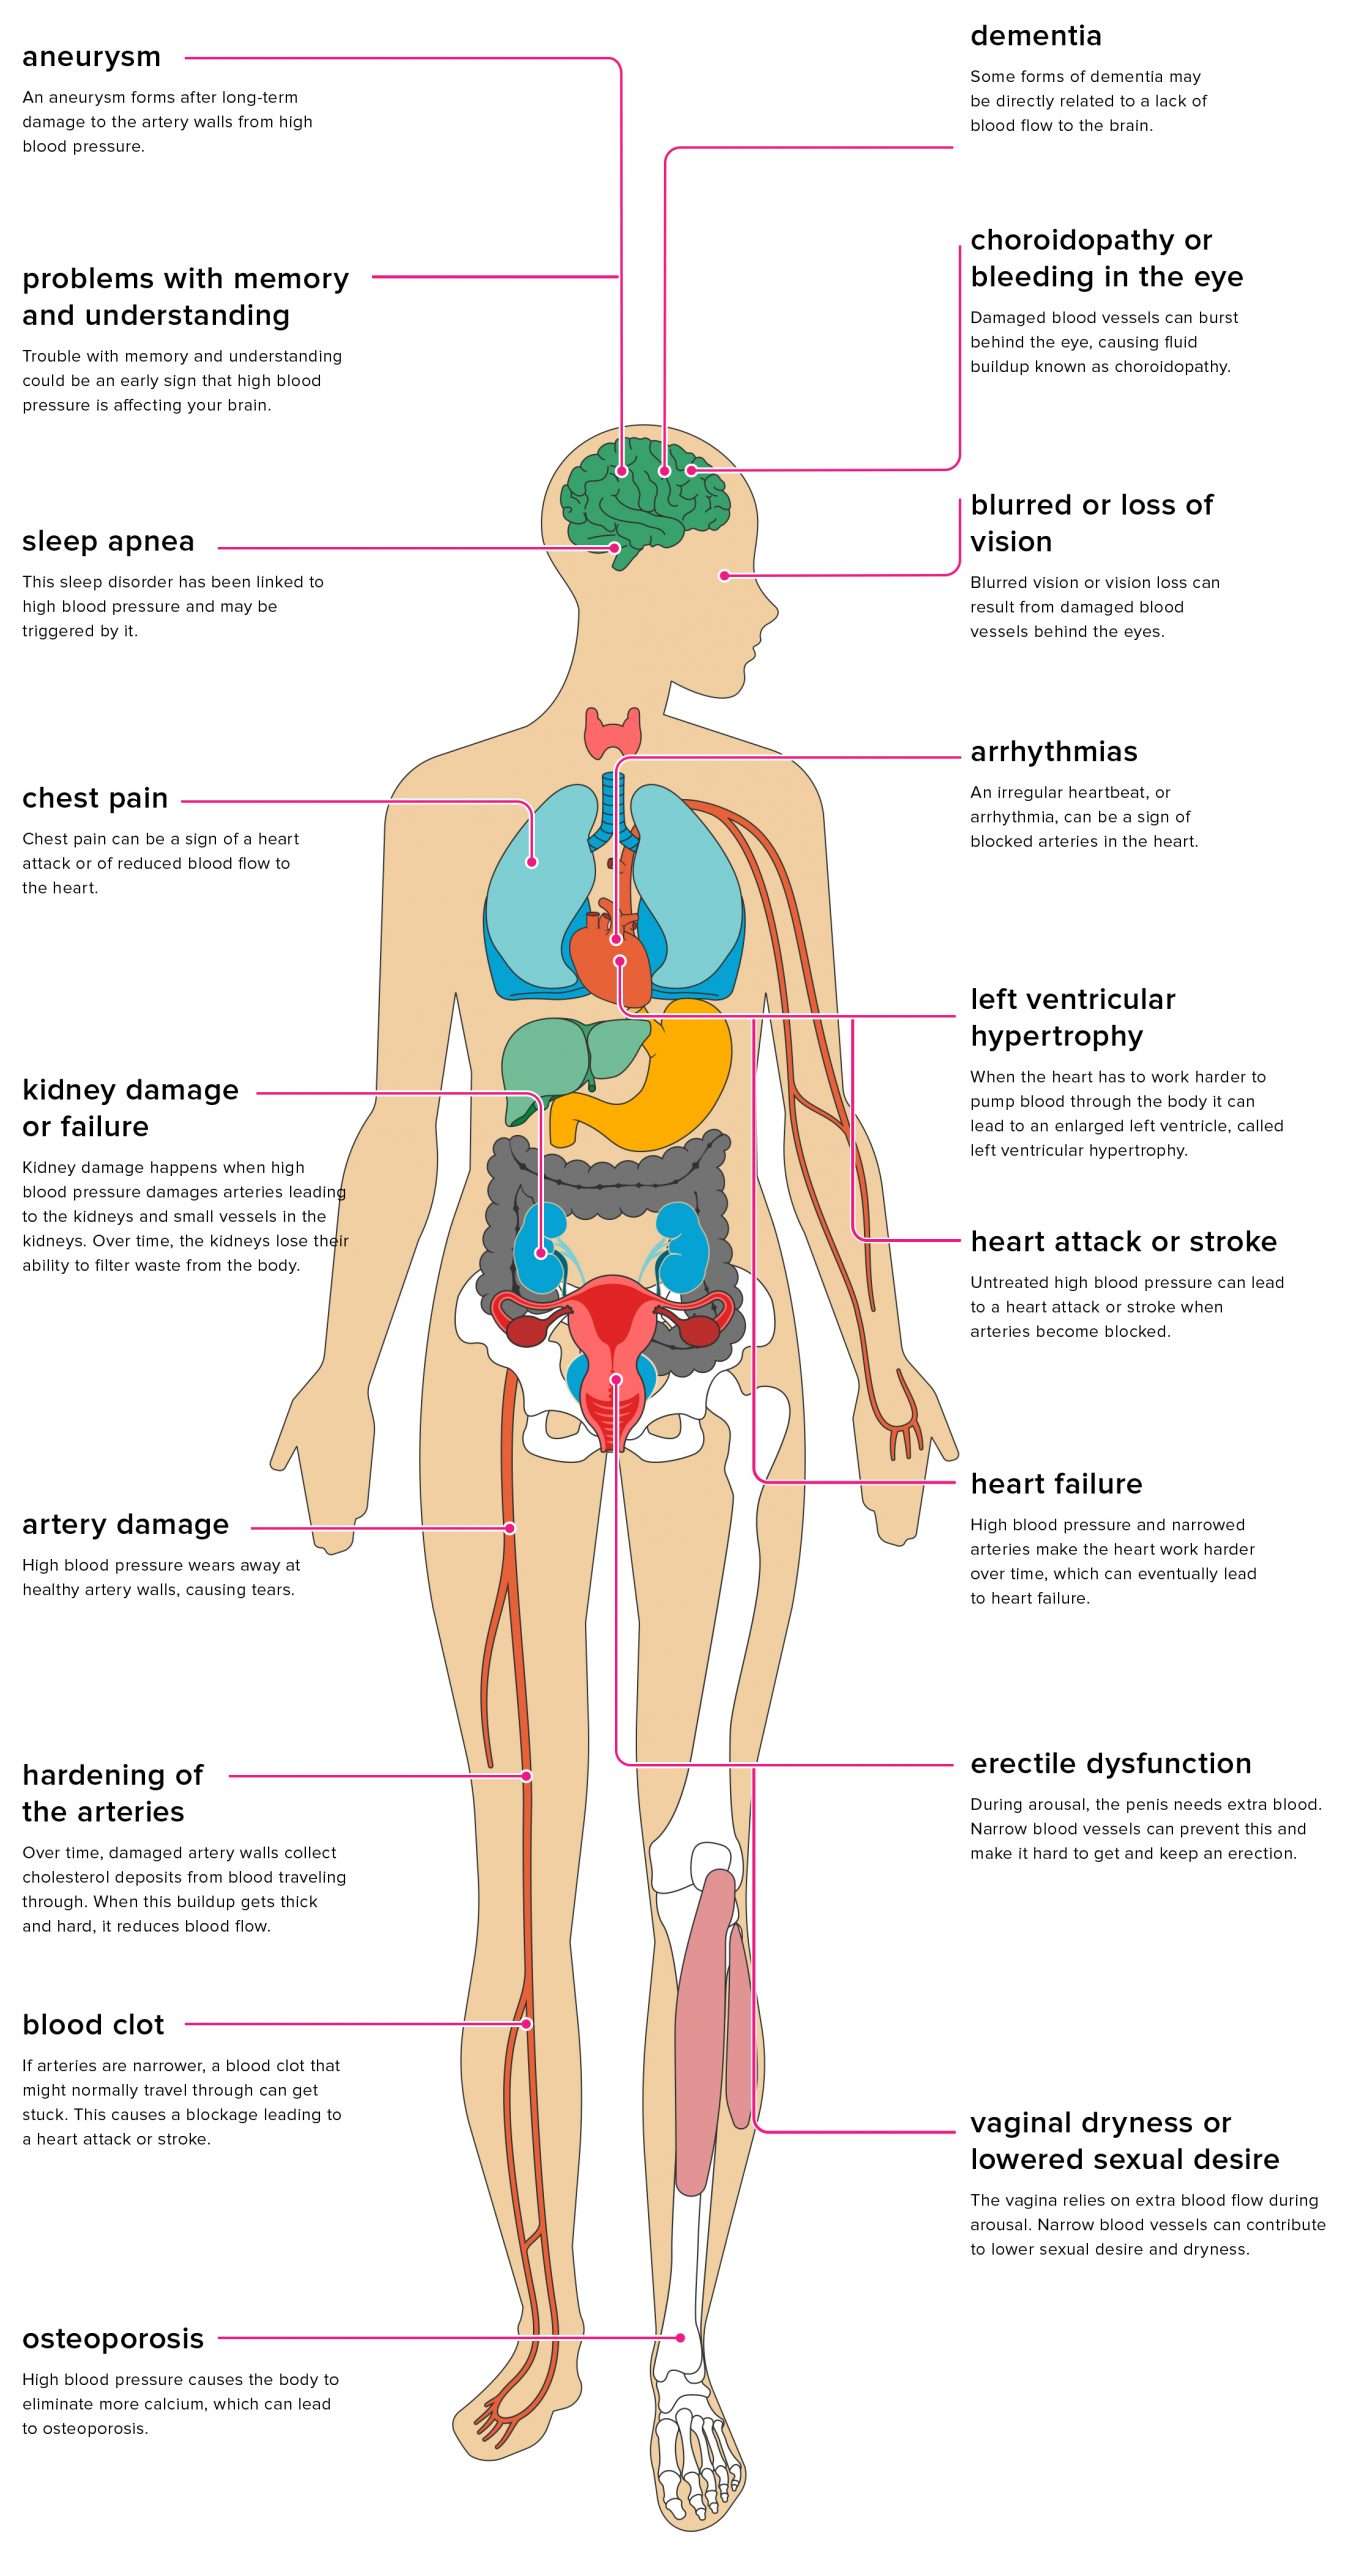 The Effects of Hypertension on the Body